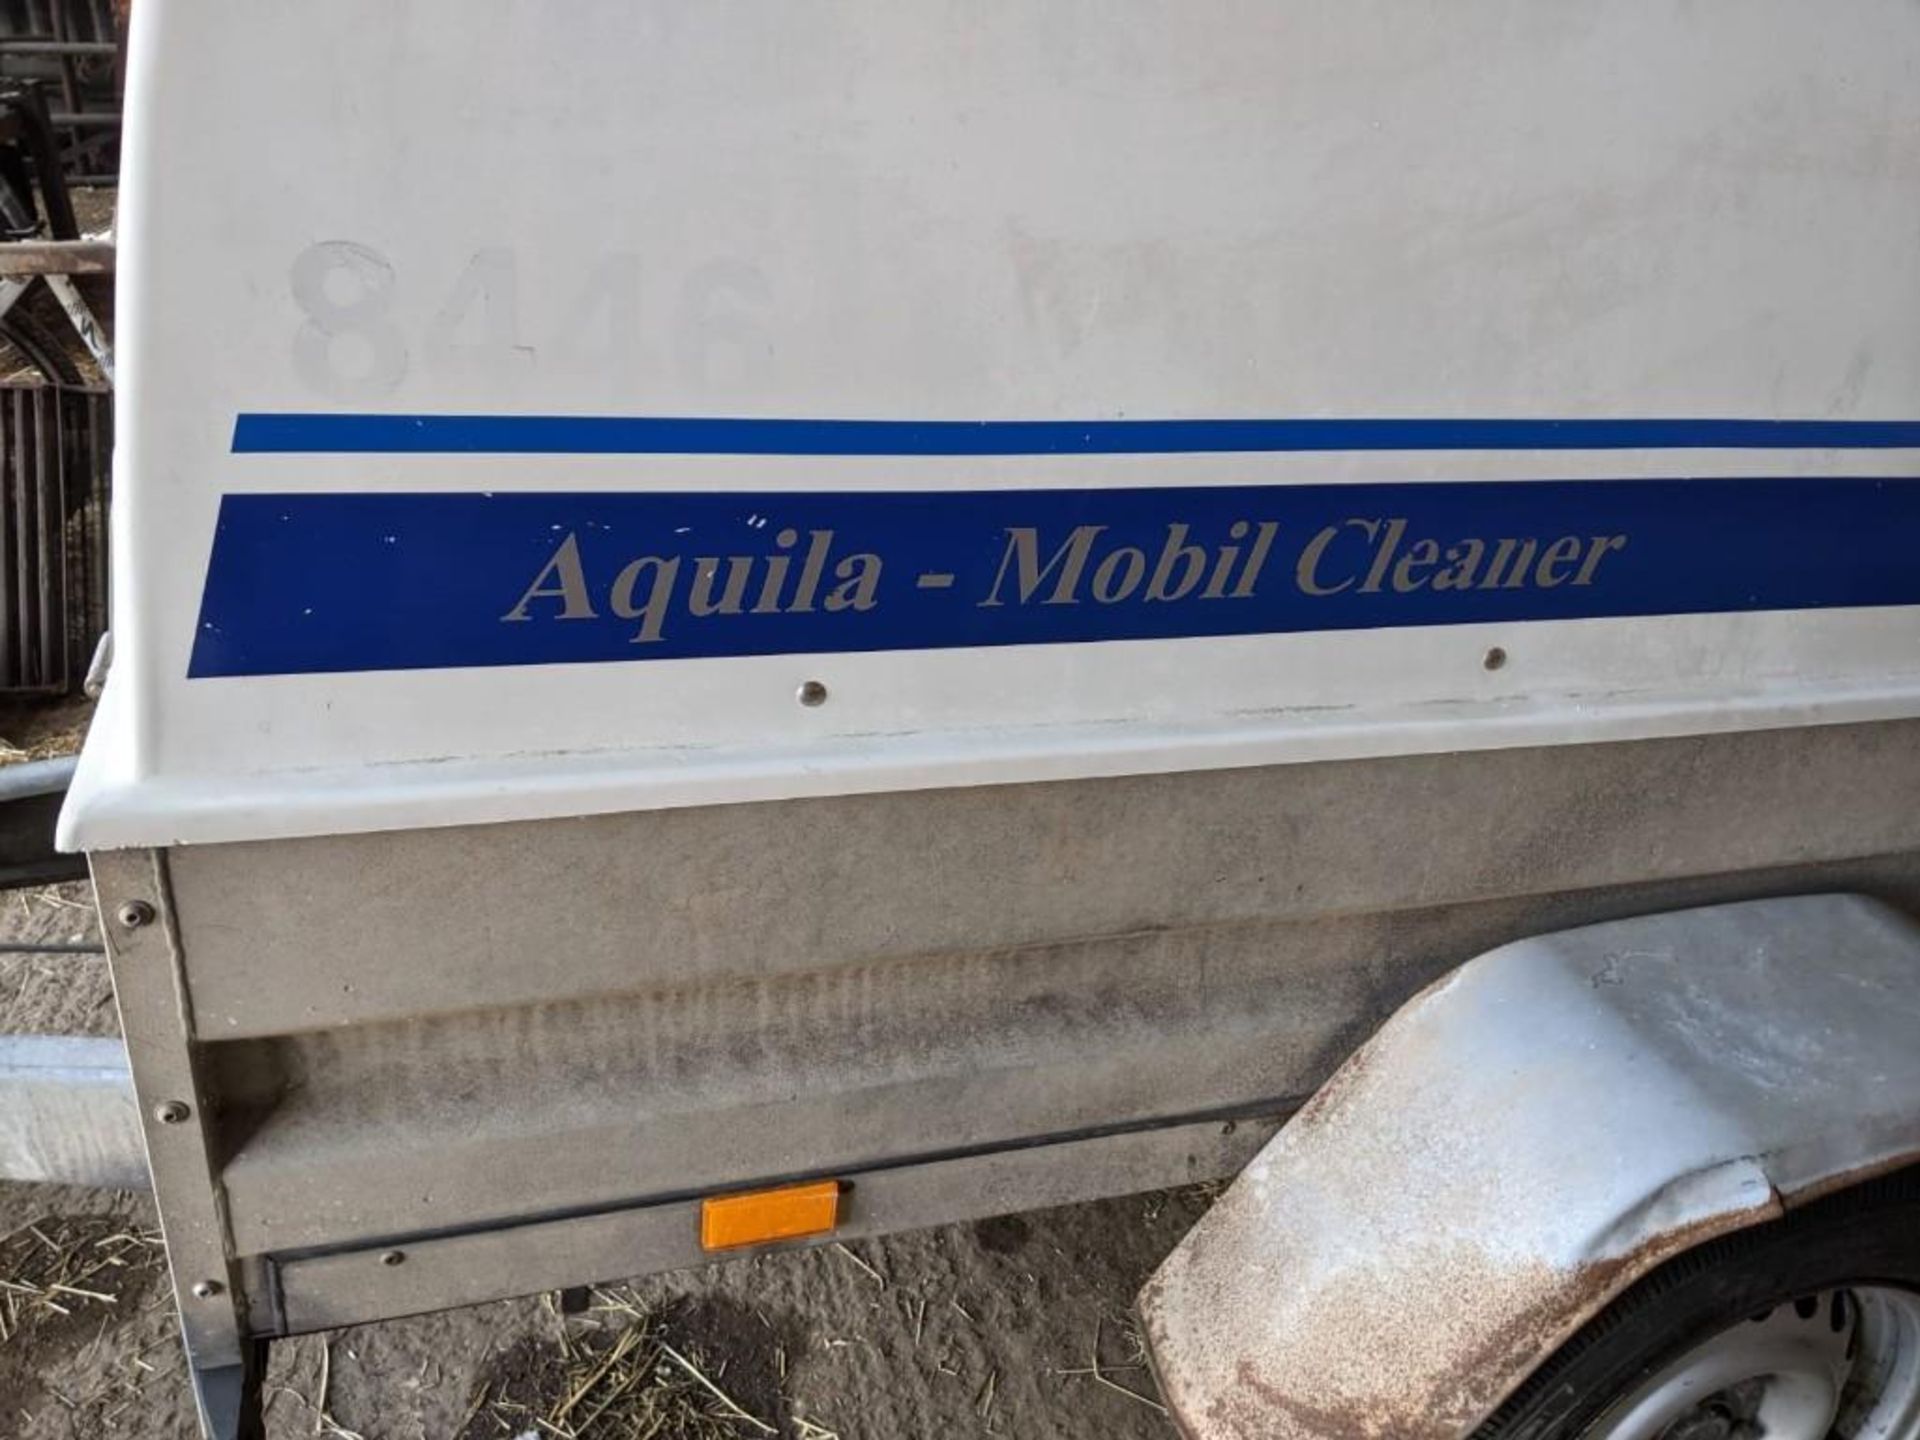 Aguilia mobile cleaner trailer